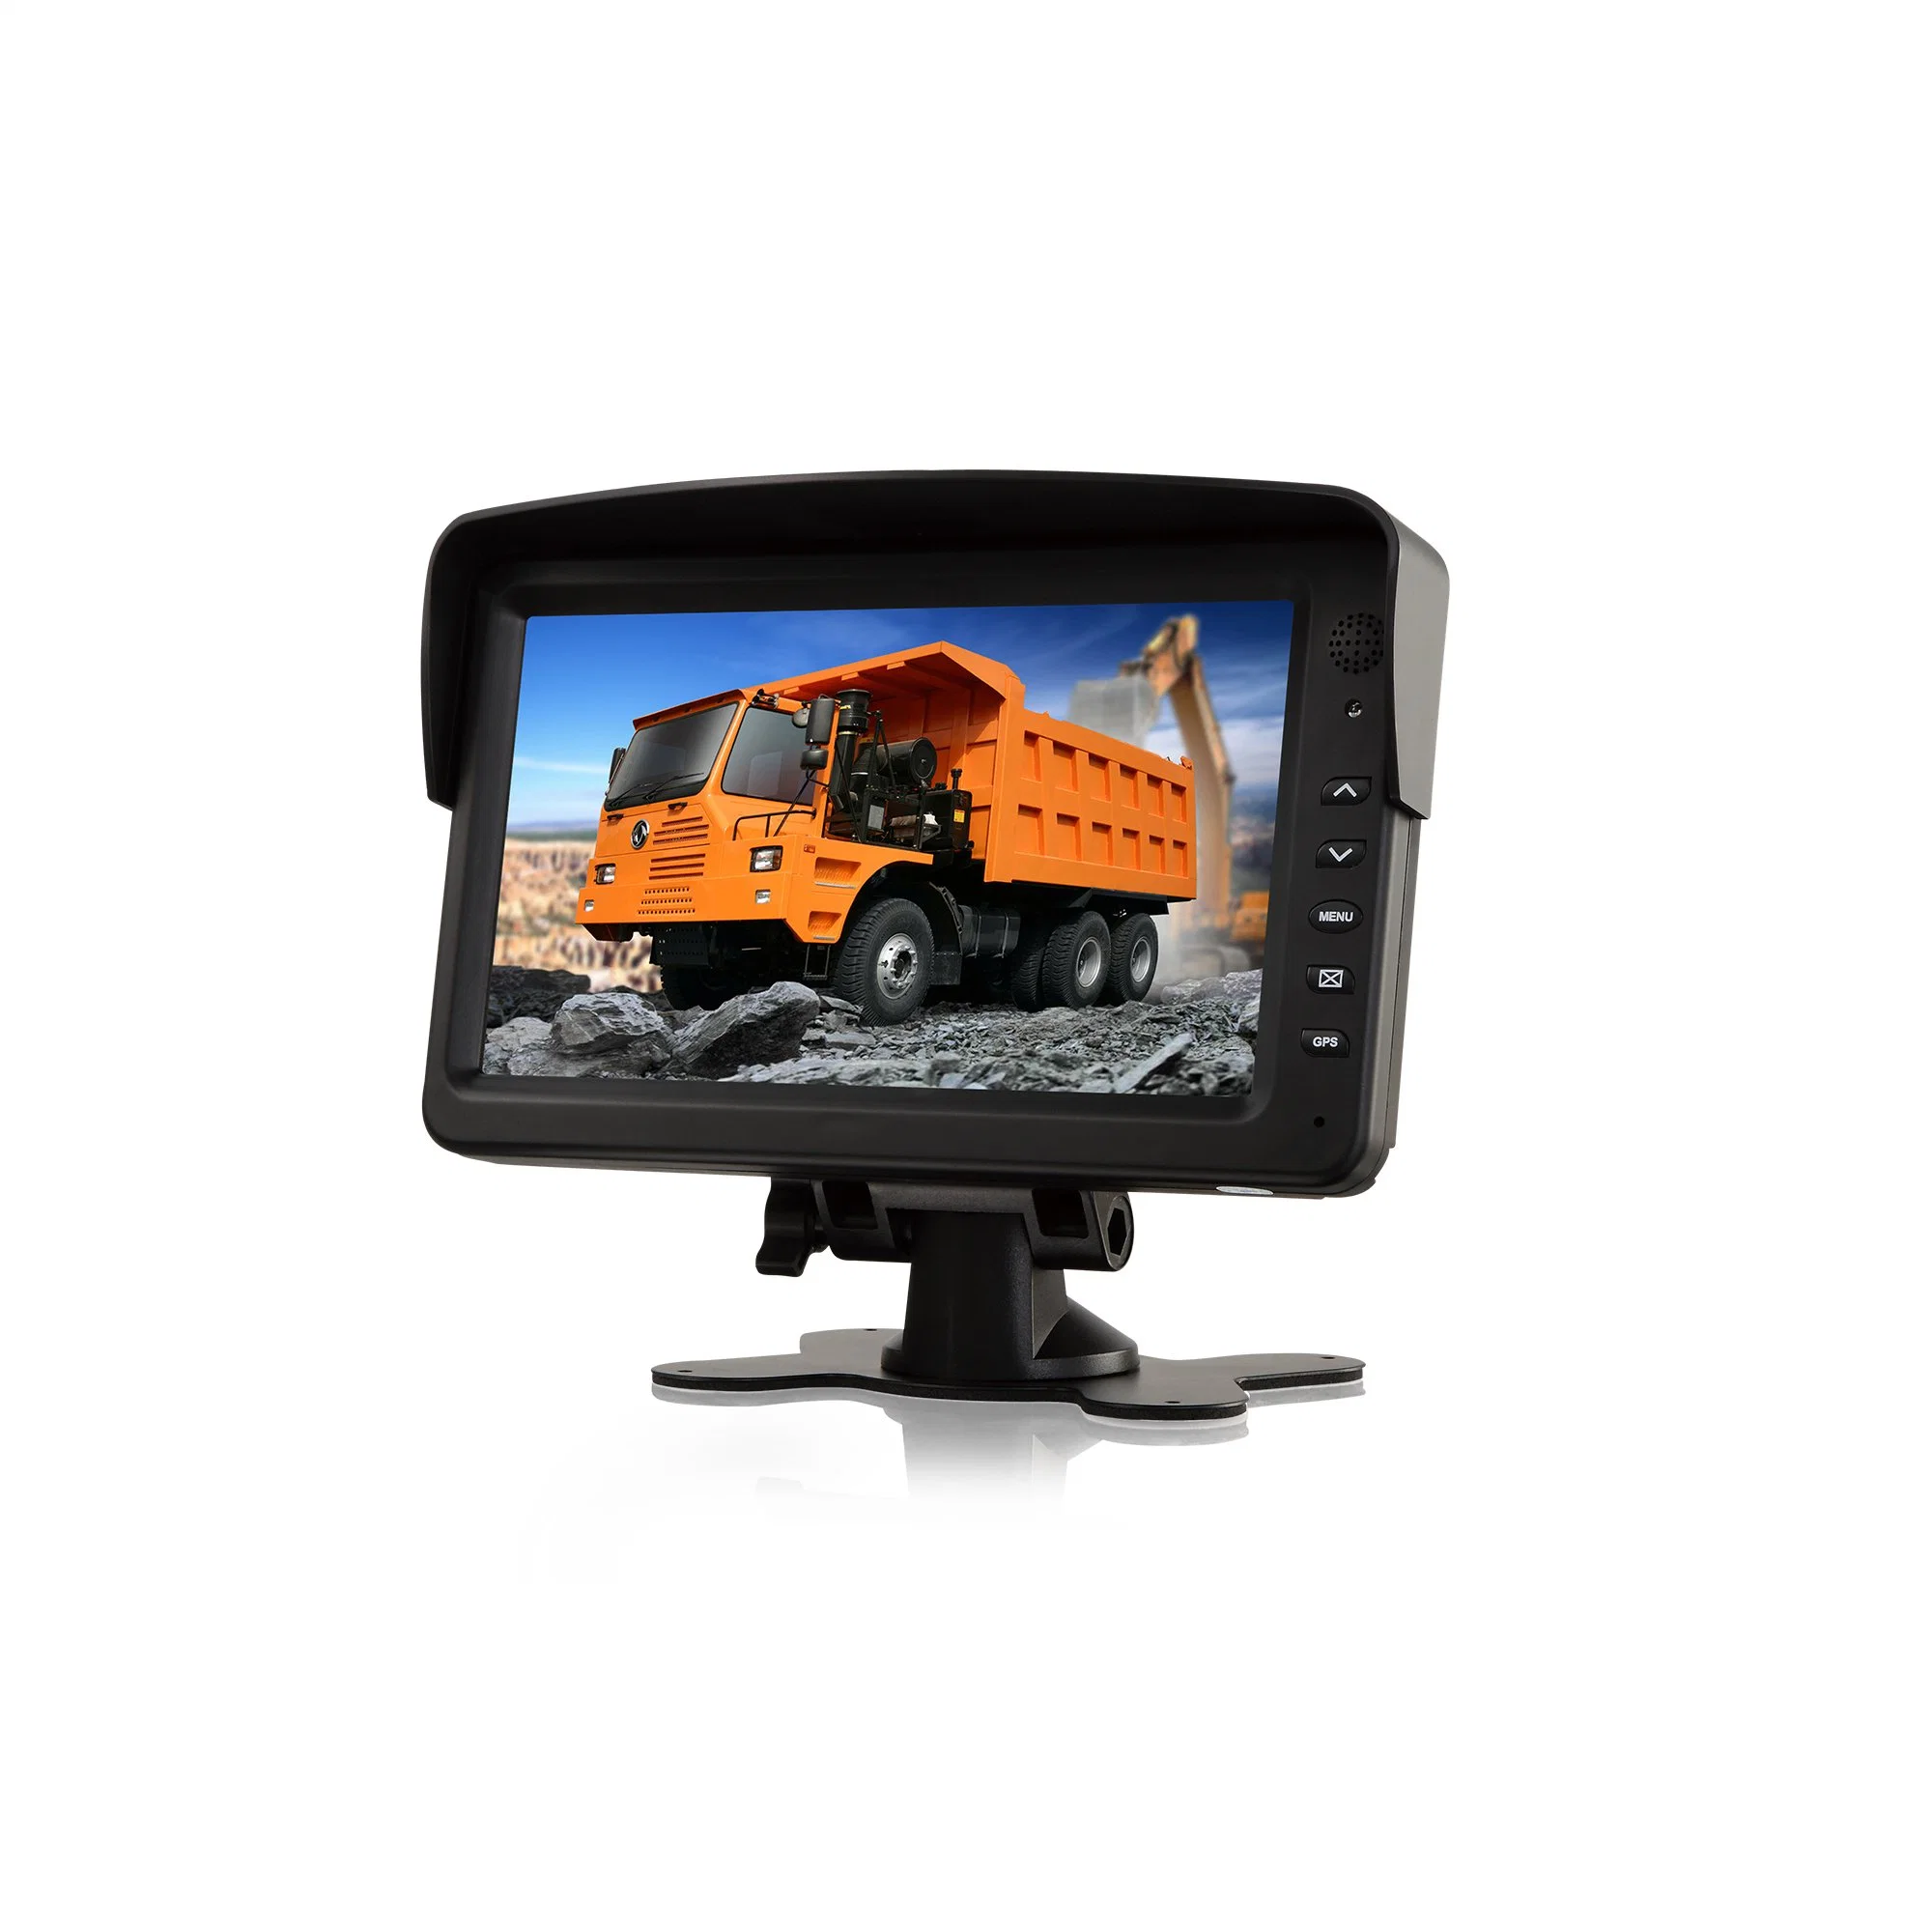 7inch Dash Mount Monitor Car Display Screen with 3 Video Inputs for Reversing Aid Car TFT LCD 800*480 Resolution